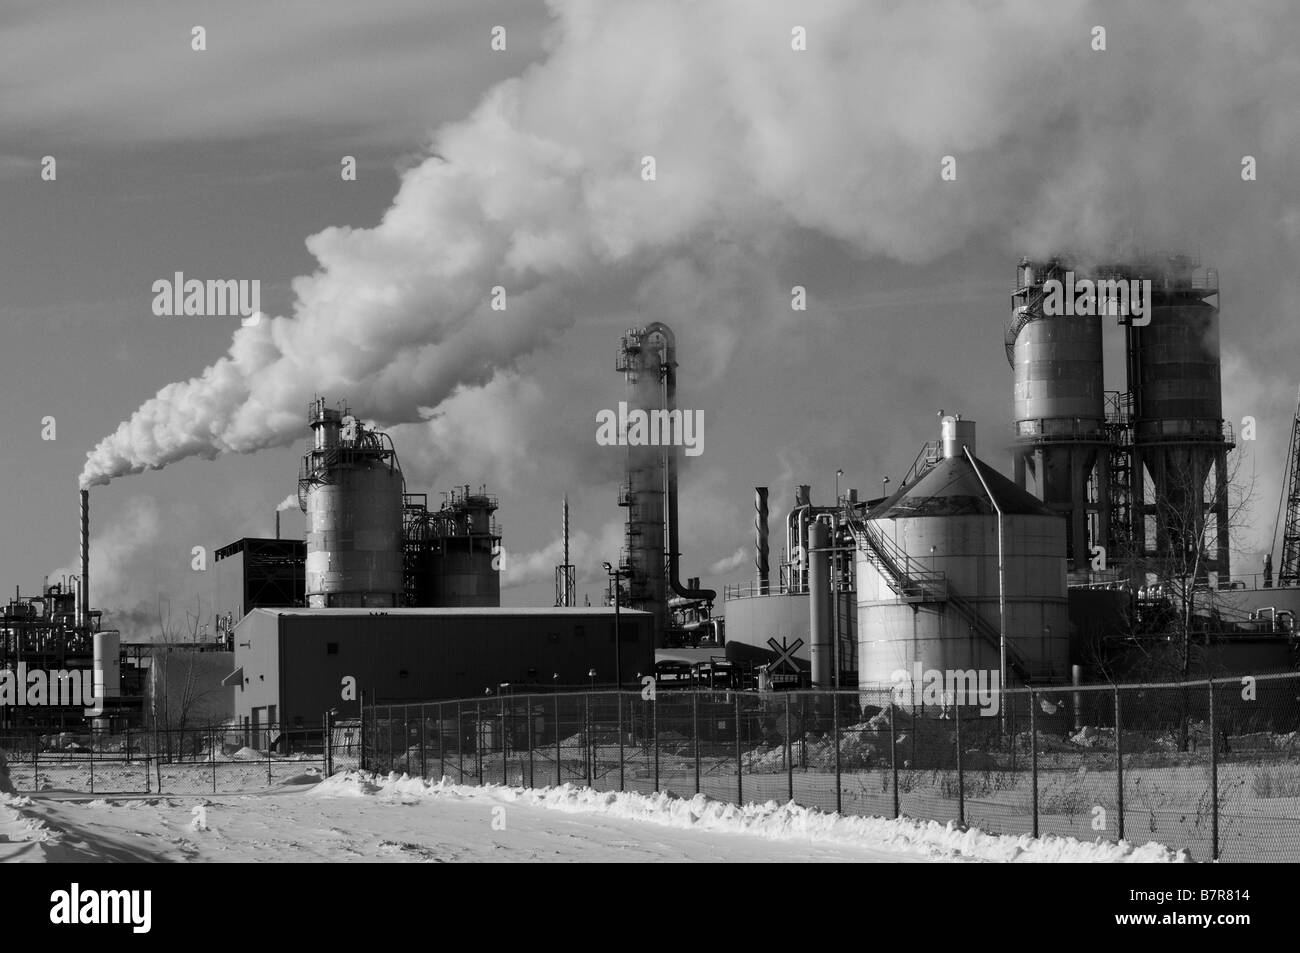 Smoke billowing from the smoke stacks of an oil refinery, pollution and global warming. Save the environment, economic disaster. Stock Photo